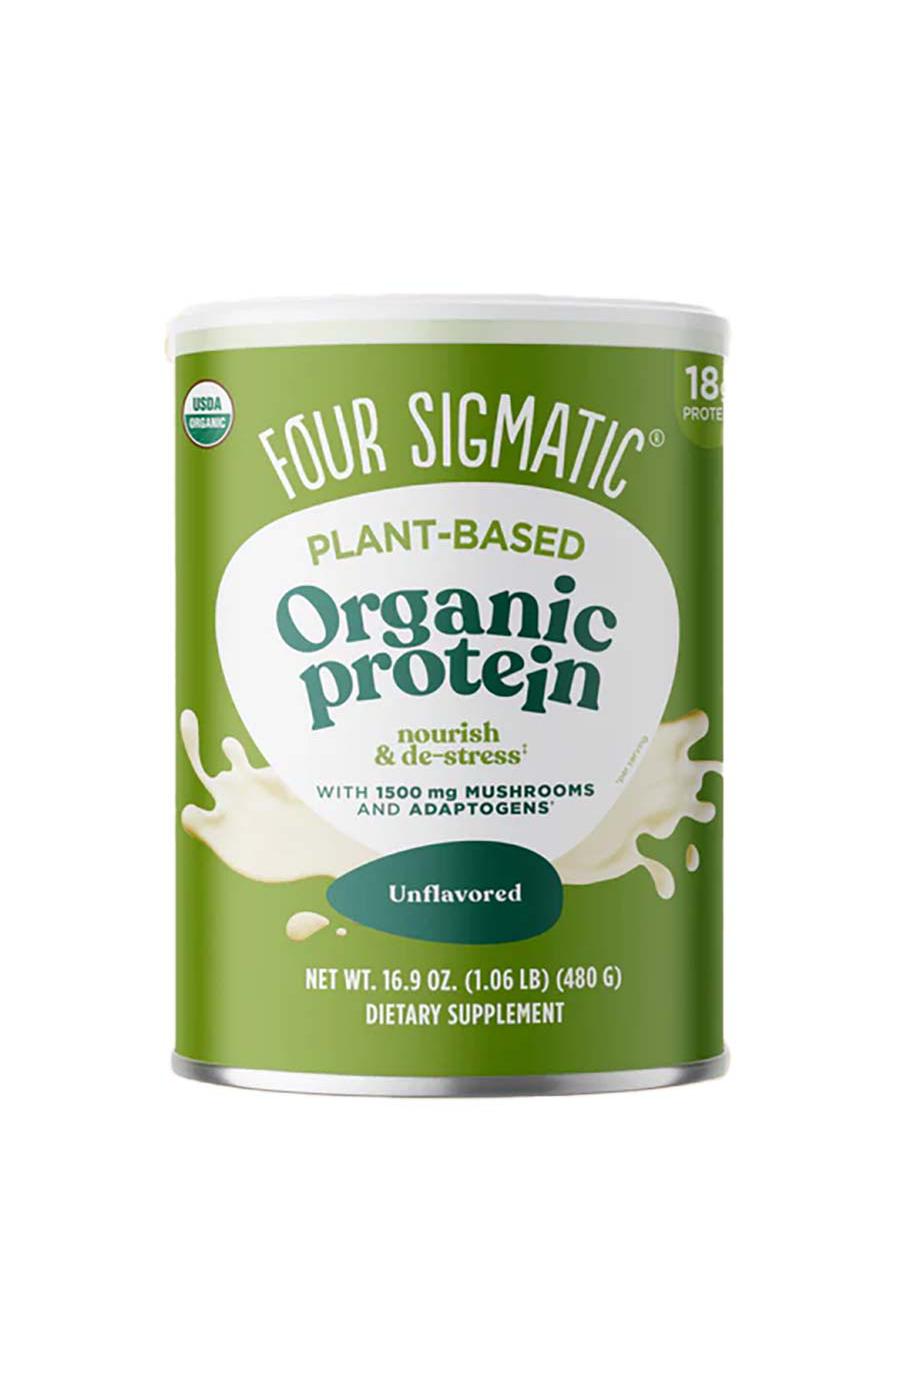 Four Sigmatic Plant-Based Organic 18g Protein Powder - Unflavored; image 1 of 4